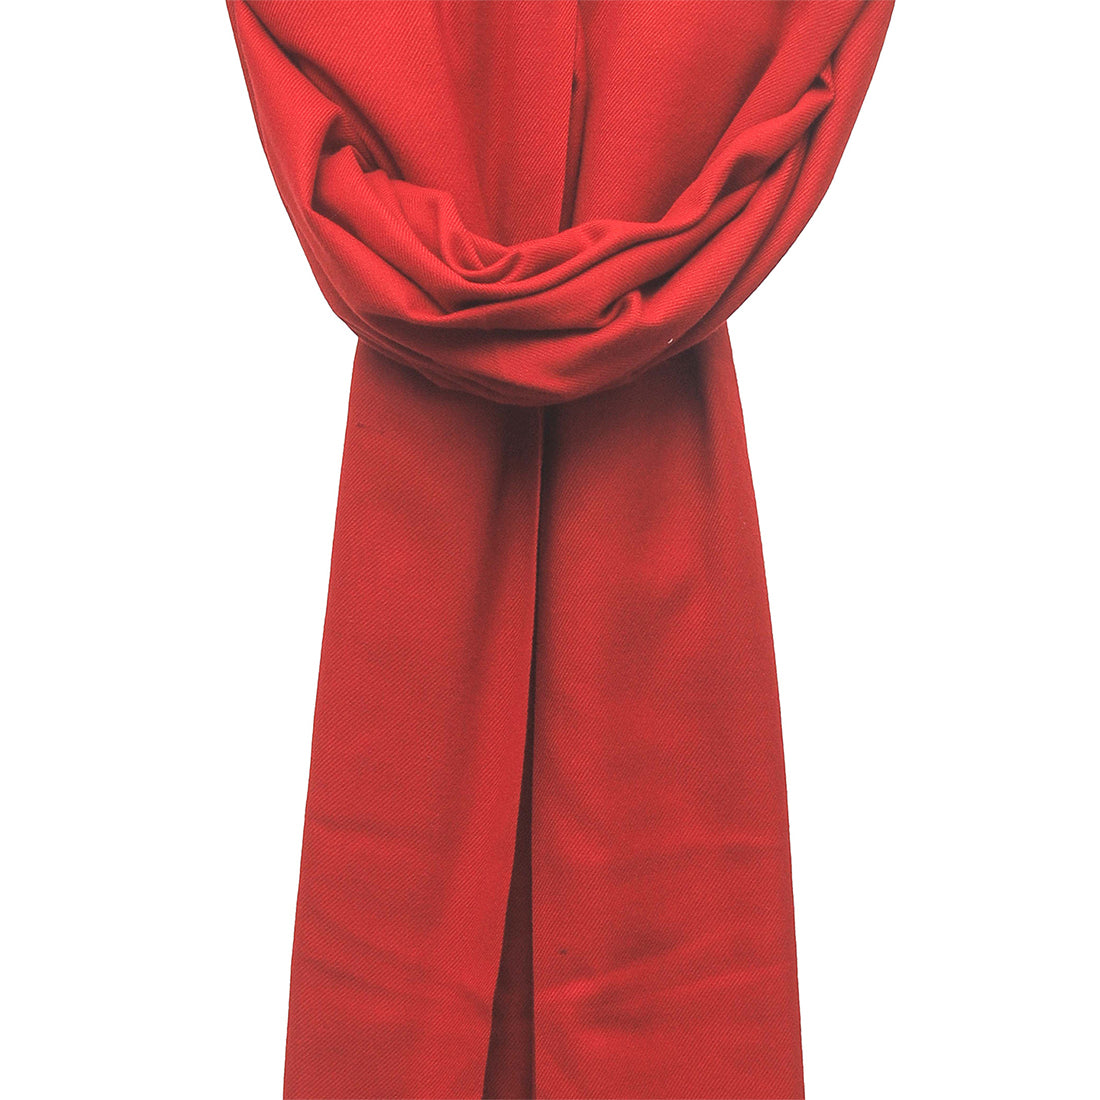 Ayesha Elegant dark red acrylic shawl, offering warmth and style for all occasions.